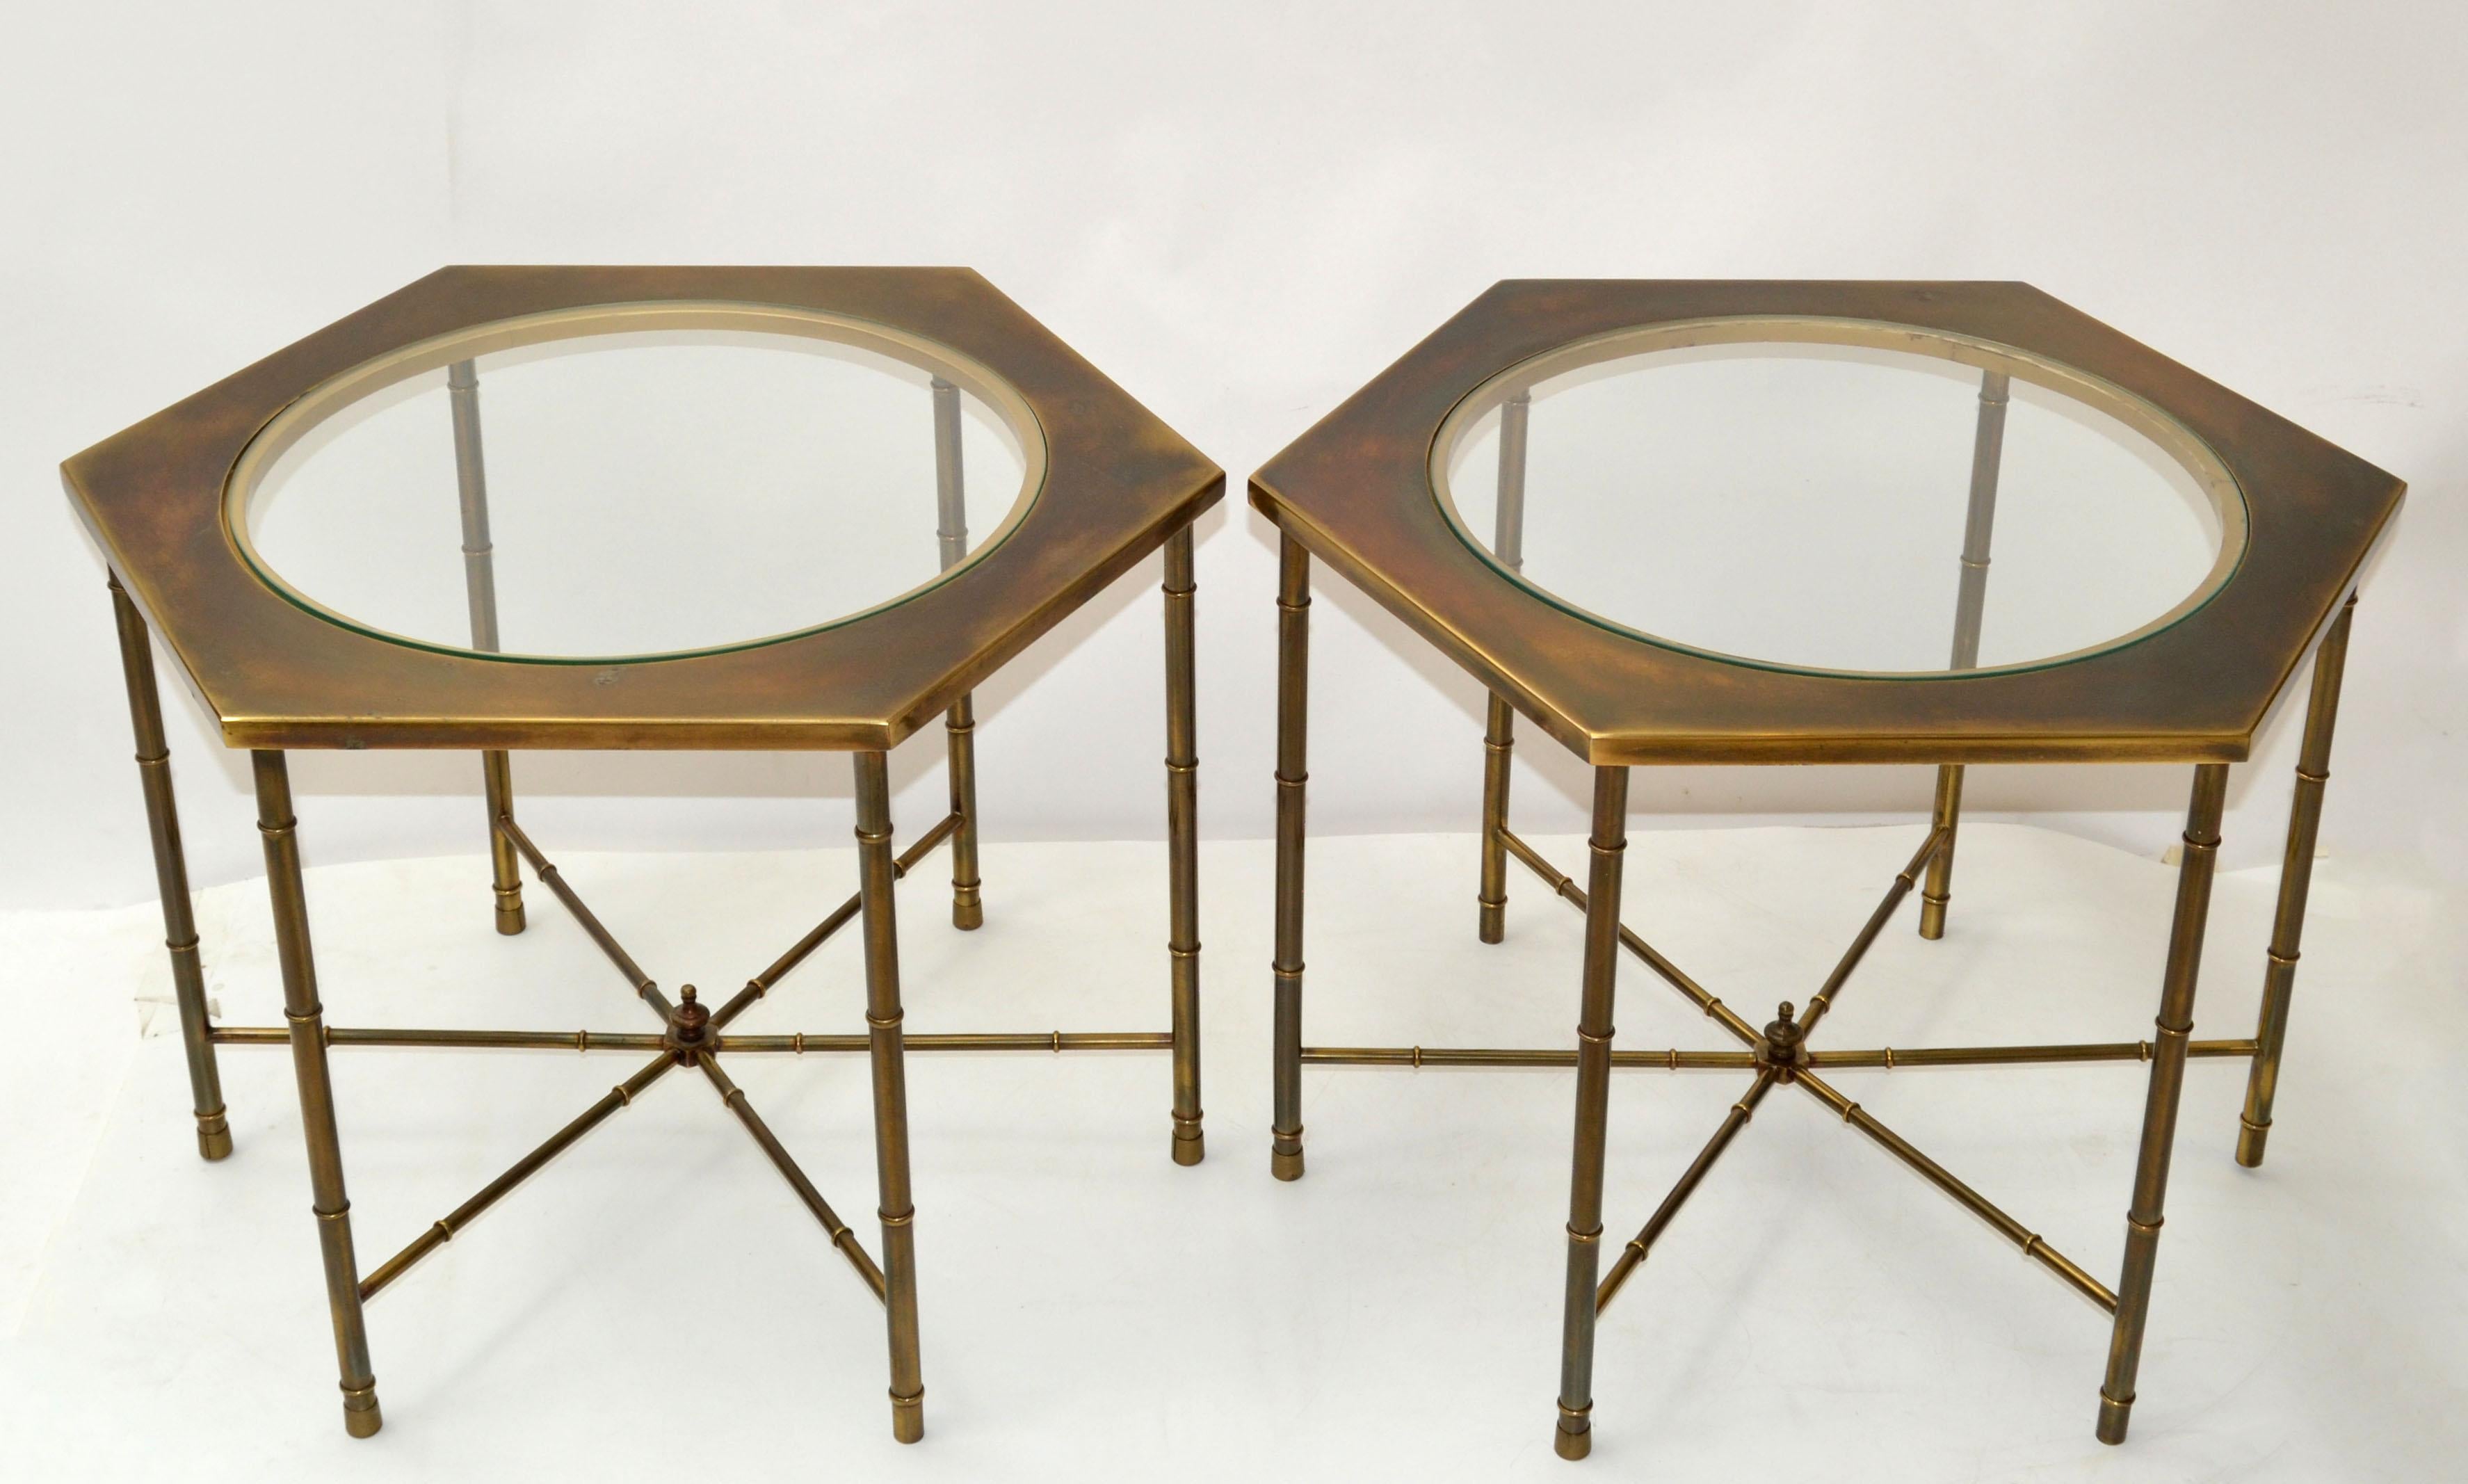 Mastercraft Solid Brass Faux Bamboo & Glass Hexagonal Drink Cocktail Table, Pair 5